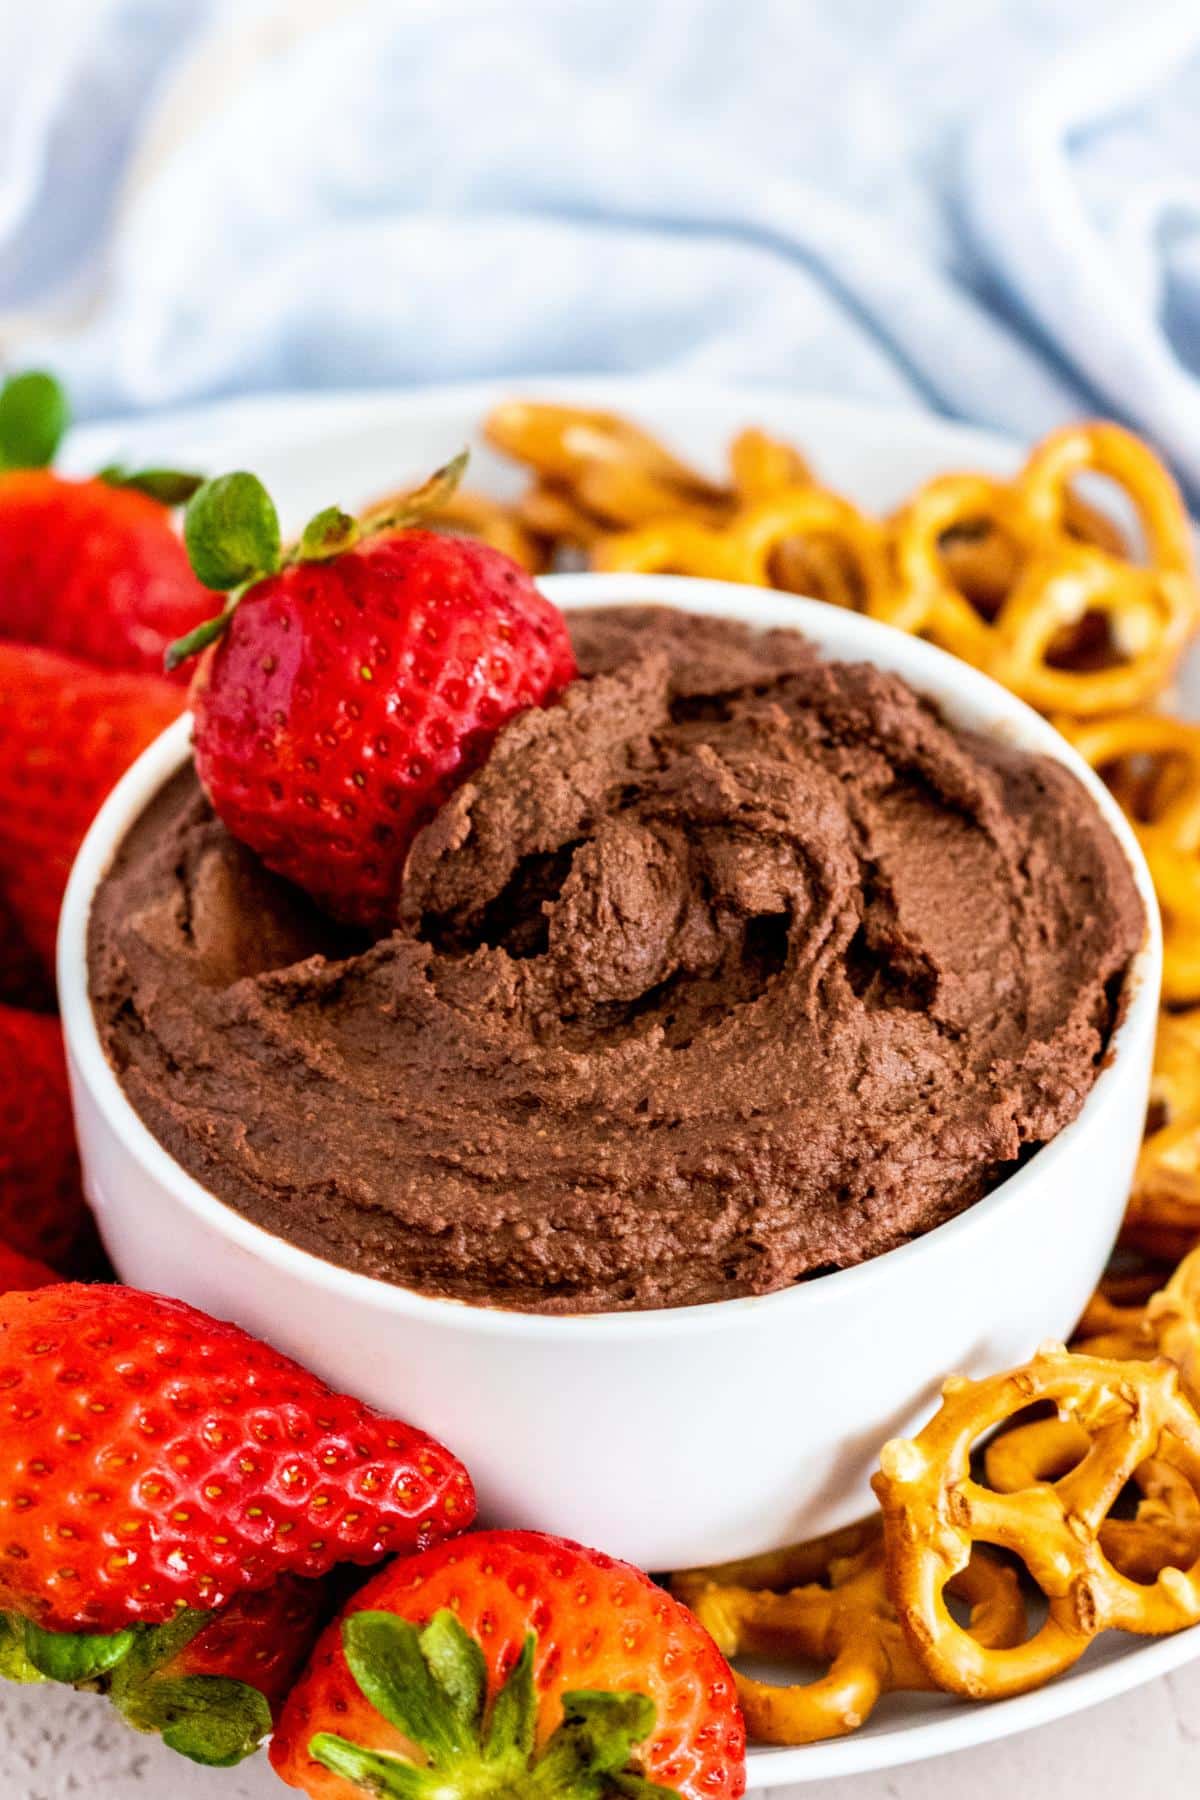 Bowl of dark chocolate hummus with a strawberry being dipped it in surrounded by more strawberries and mini pretzels.